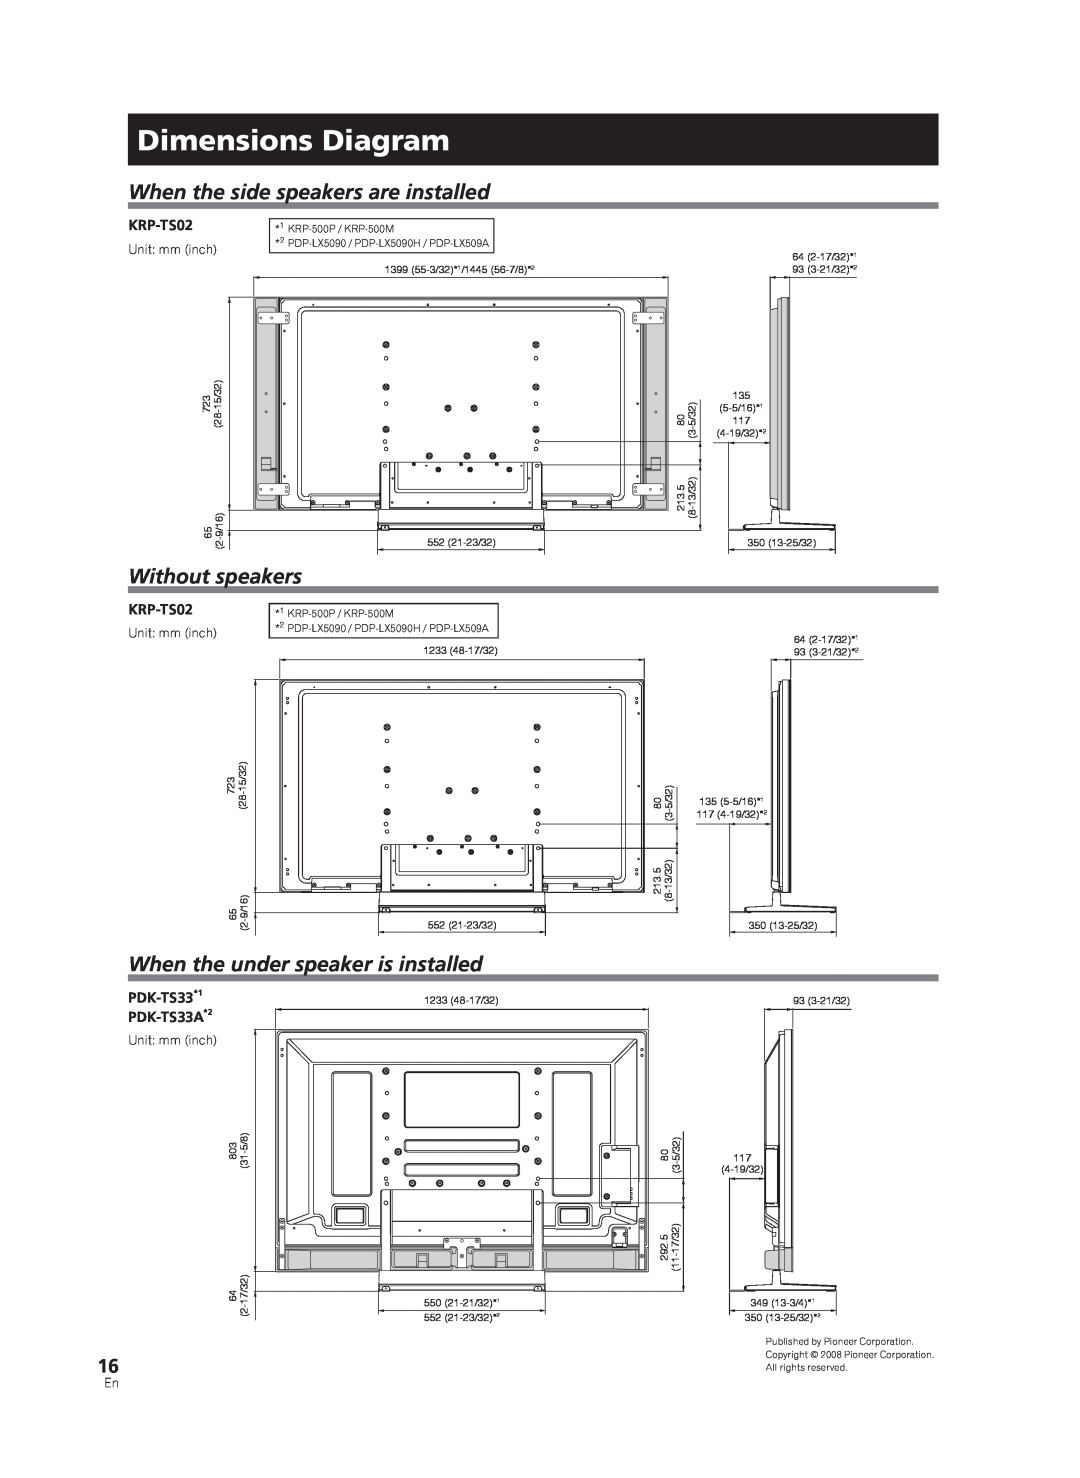 Pioneer PDK-TS33A, KRP-TS02 Dimensions Diagram, When the side speakers are installed, Without speakers, Unit: mm inch 